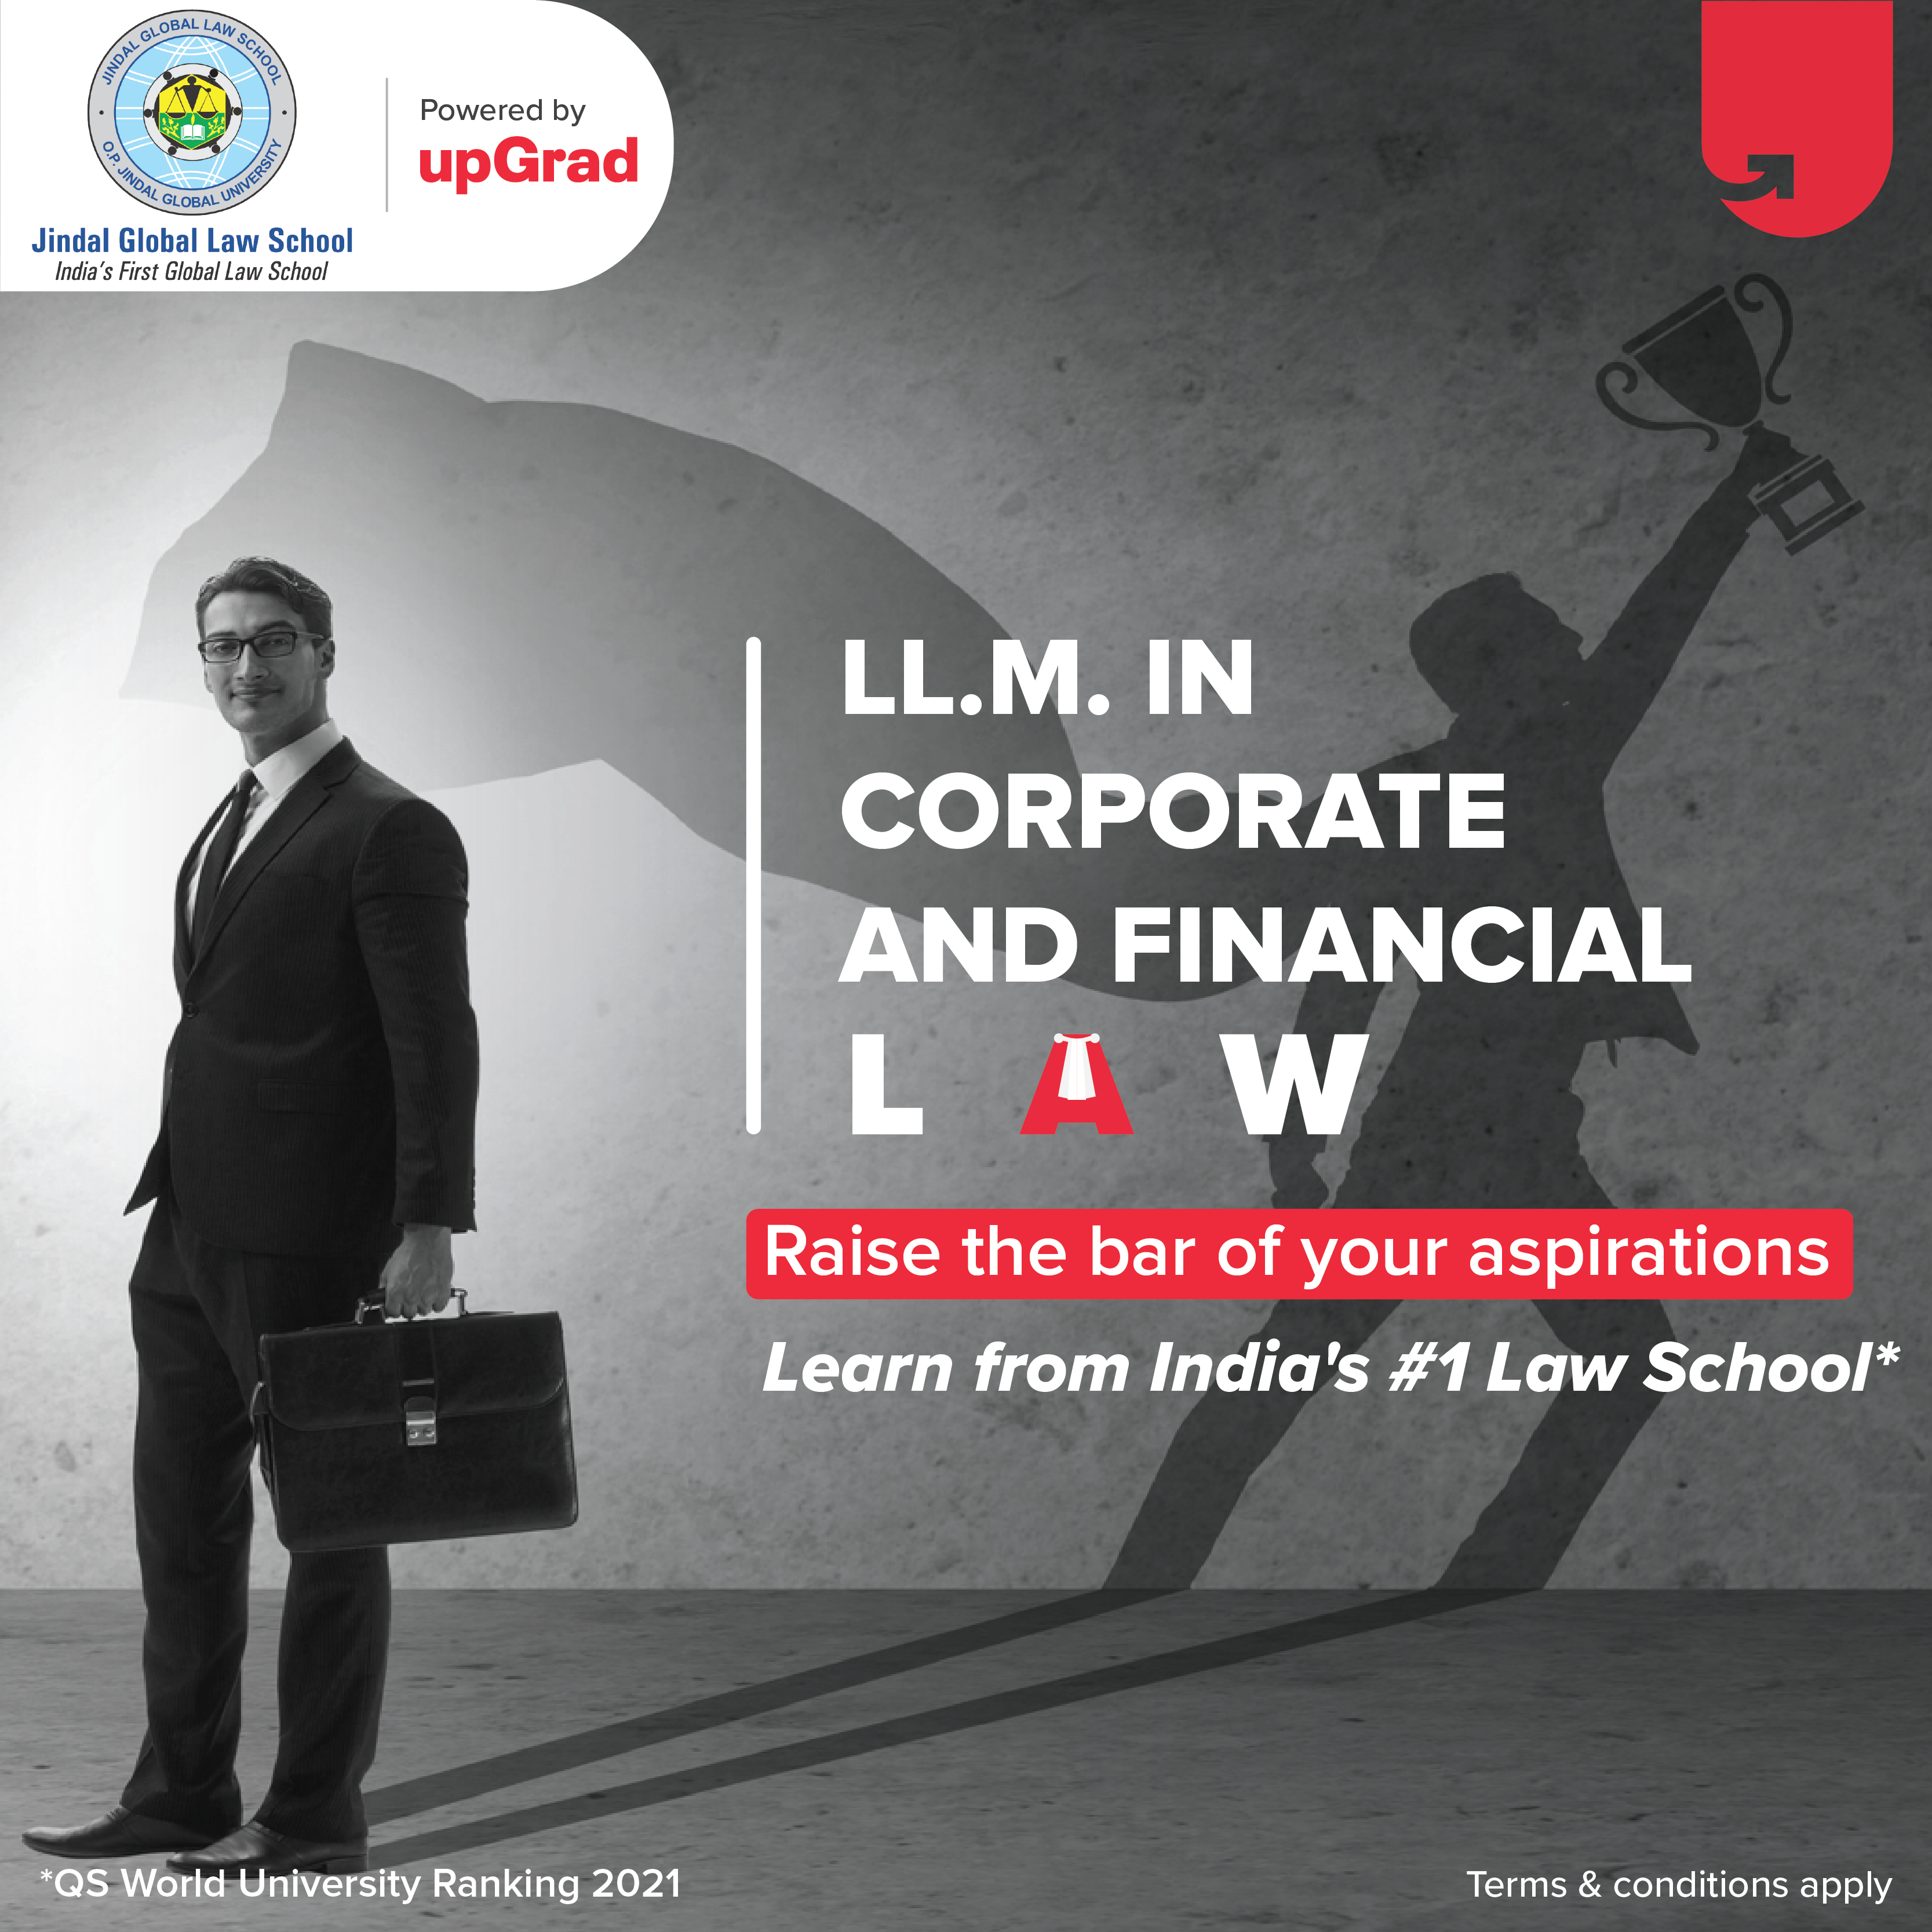 upGrad Advantage - With JGLS LL.M. In Corporate And Financial Law (Blended Learning Program)